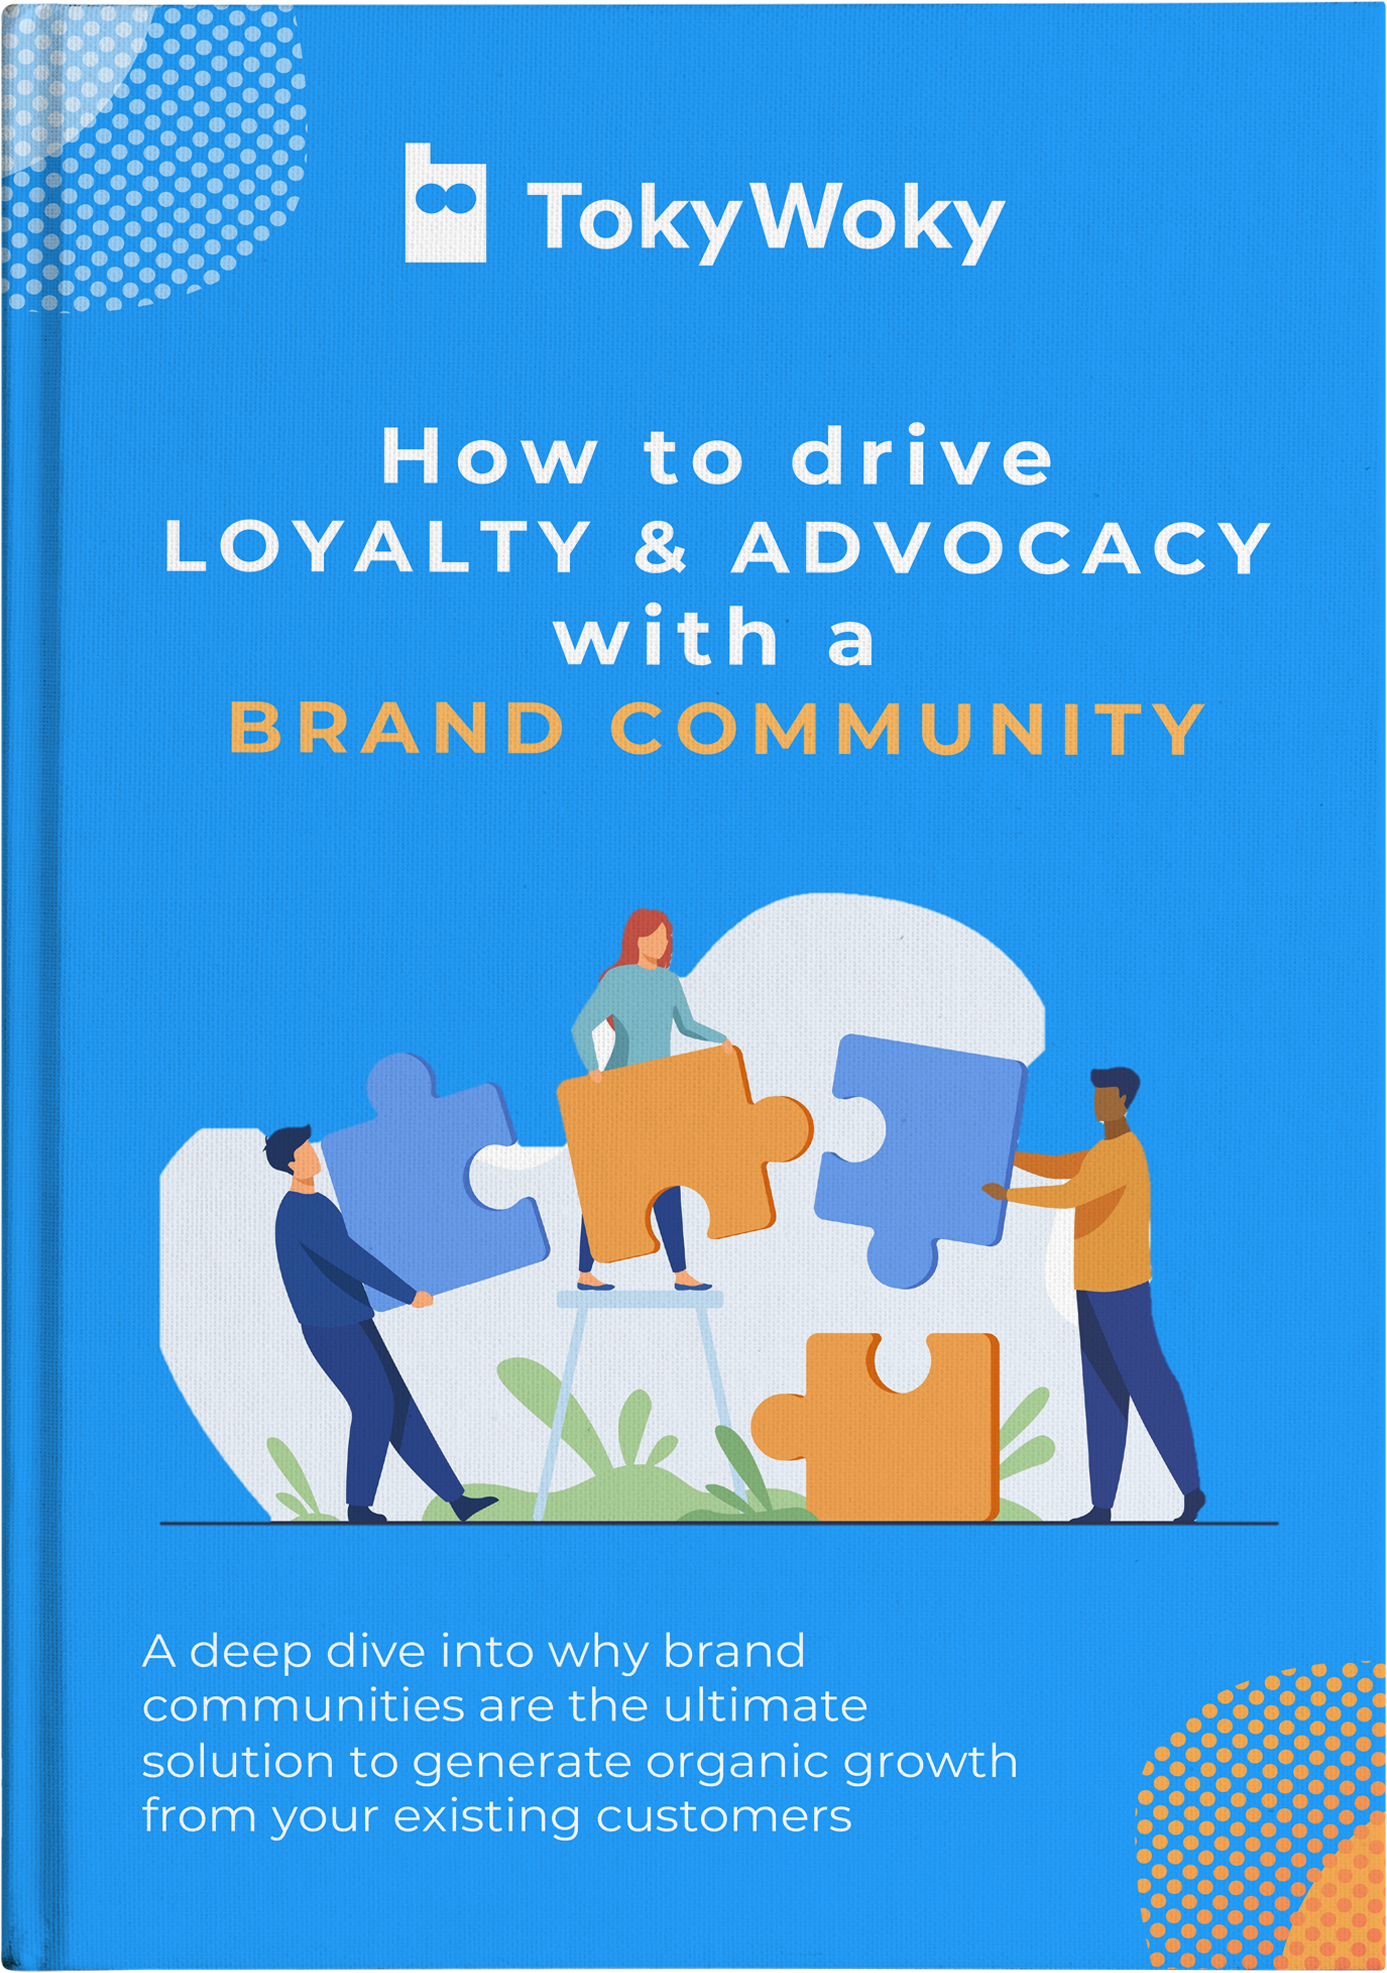 TokyWoky brand community for loyalty and advocacy